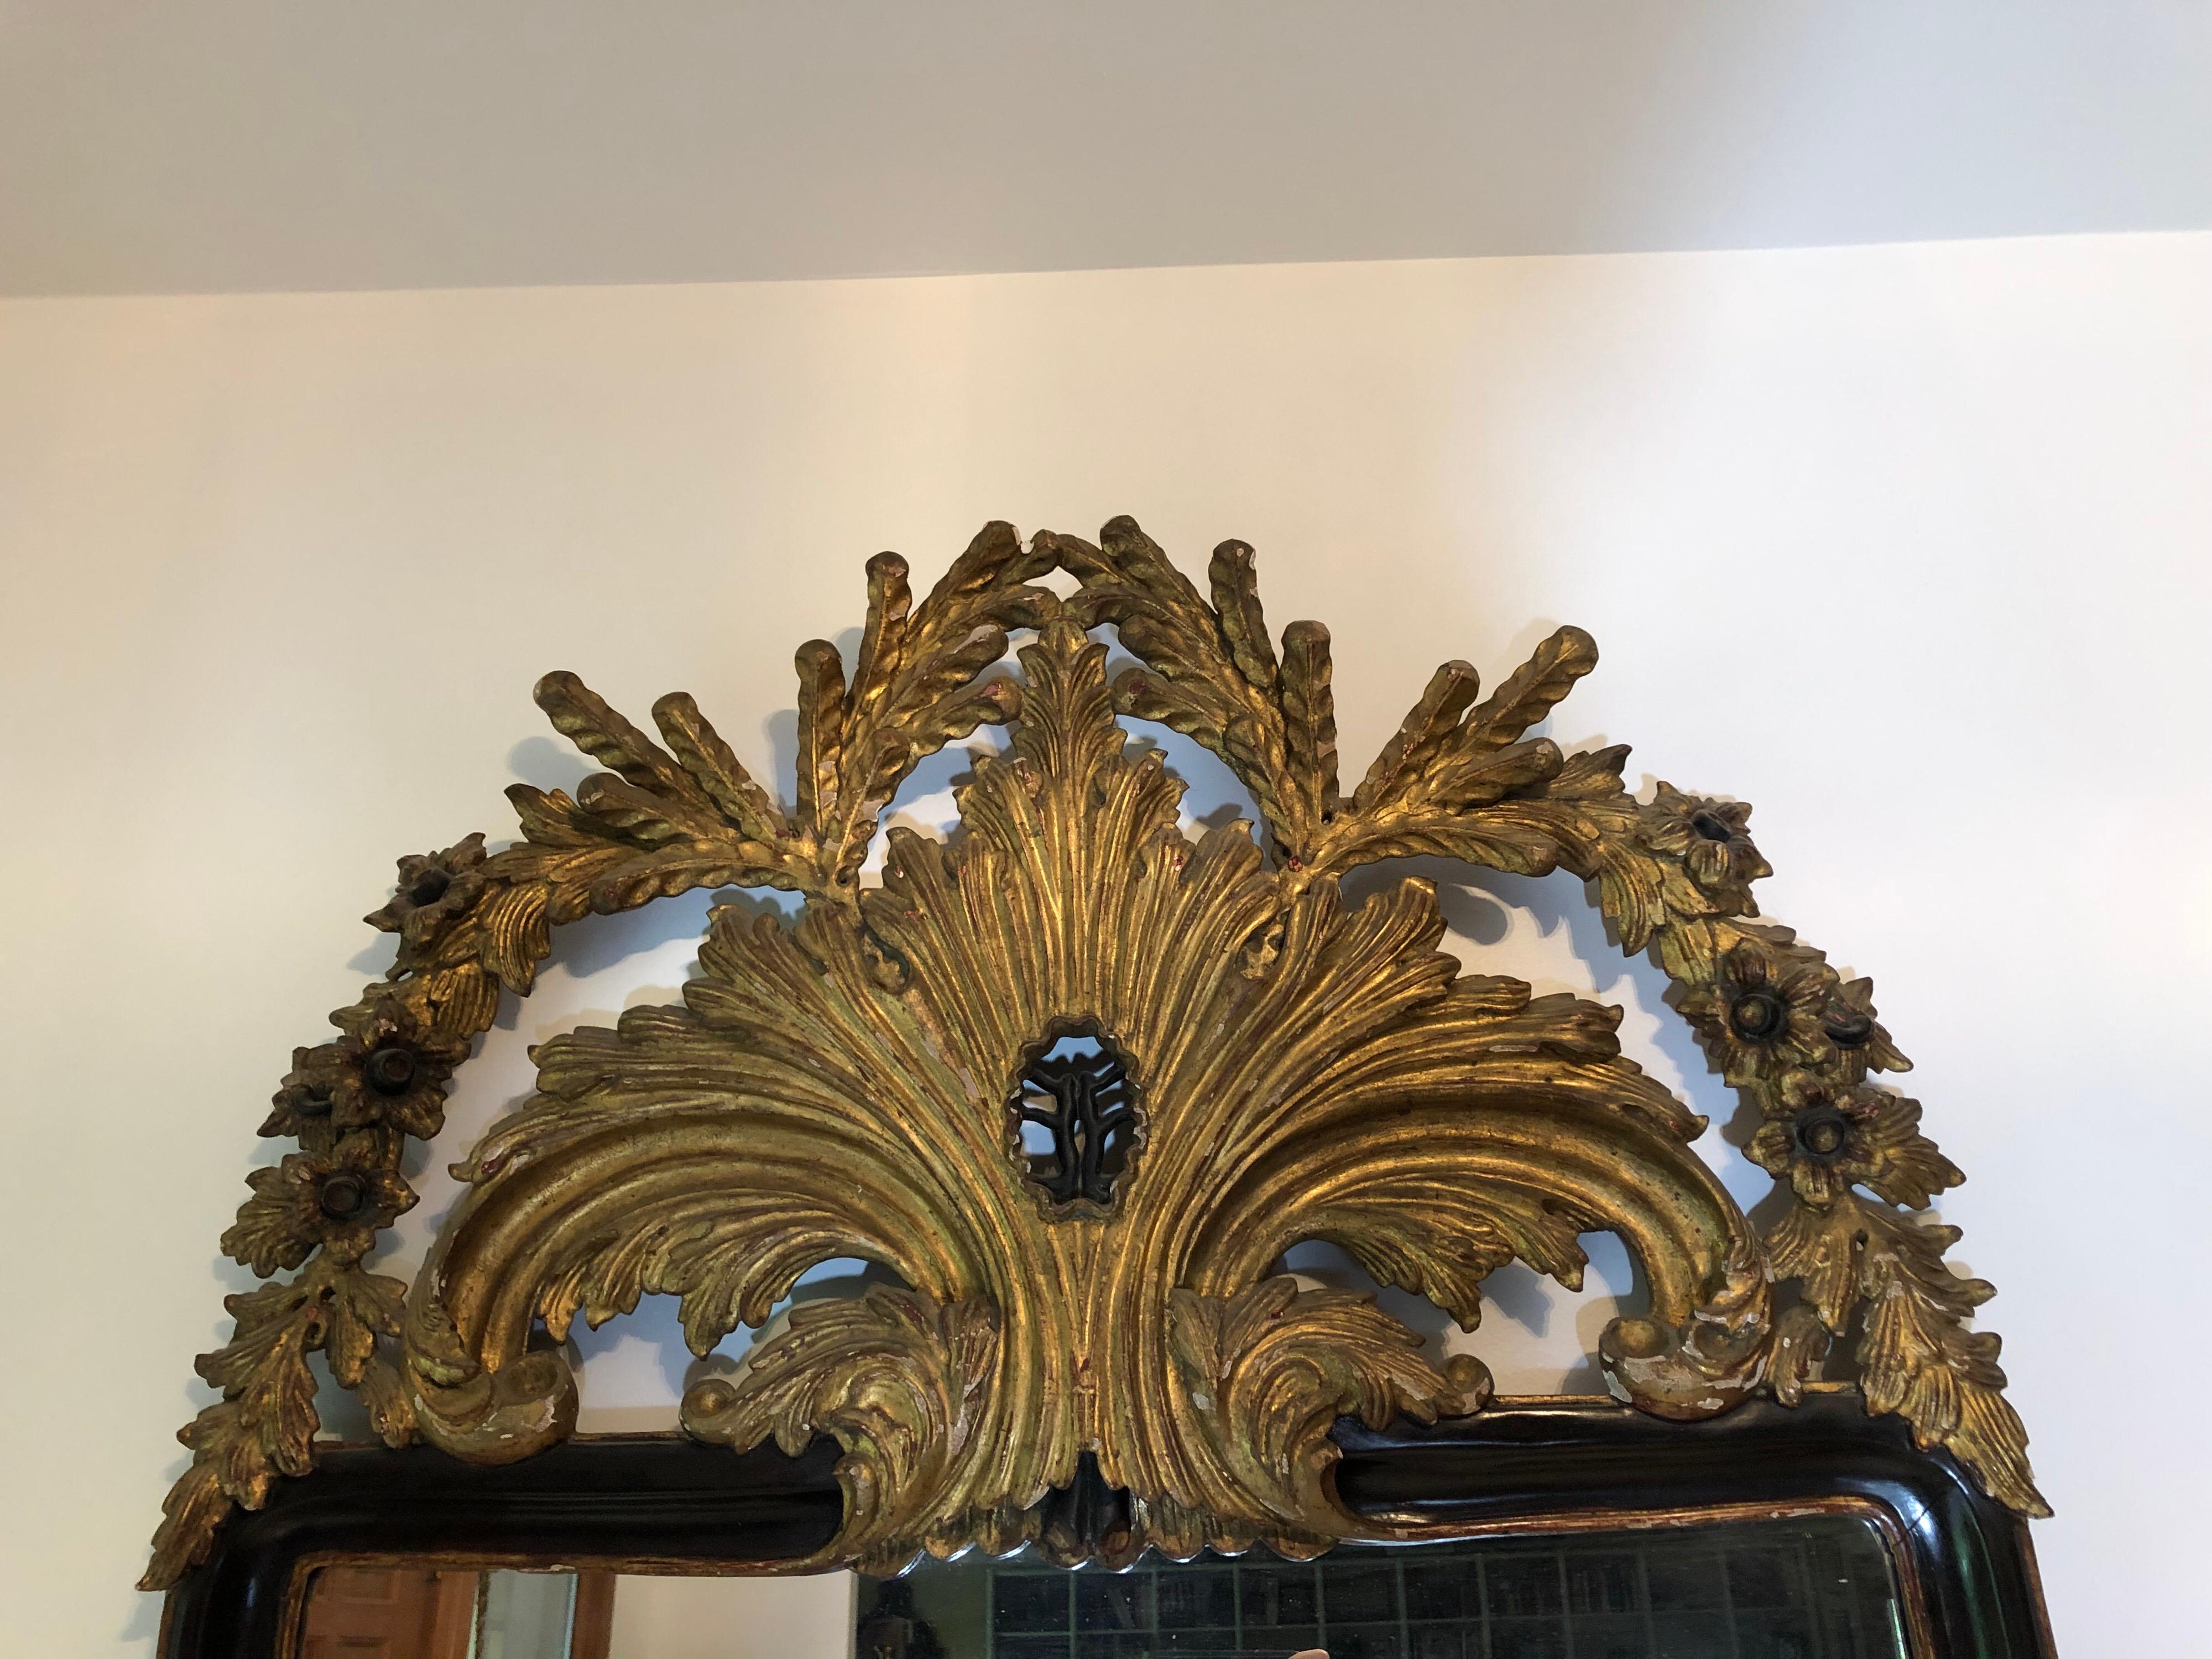 A highly decorated 19th century Belle Èpoque gilt mirror with curved ebonized frame. Pediment decorated in wreath florets and scrolls. Mirror and backing have been restored.